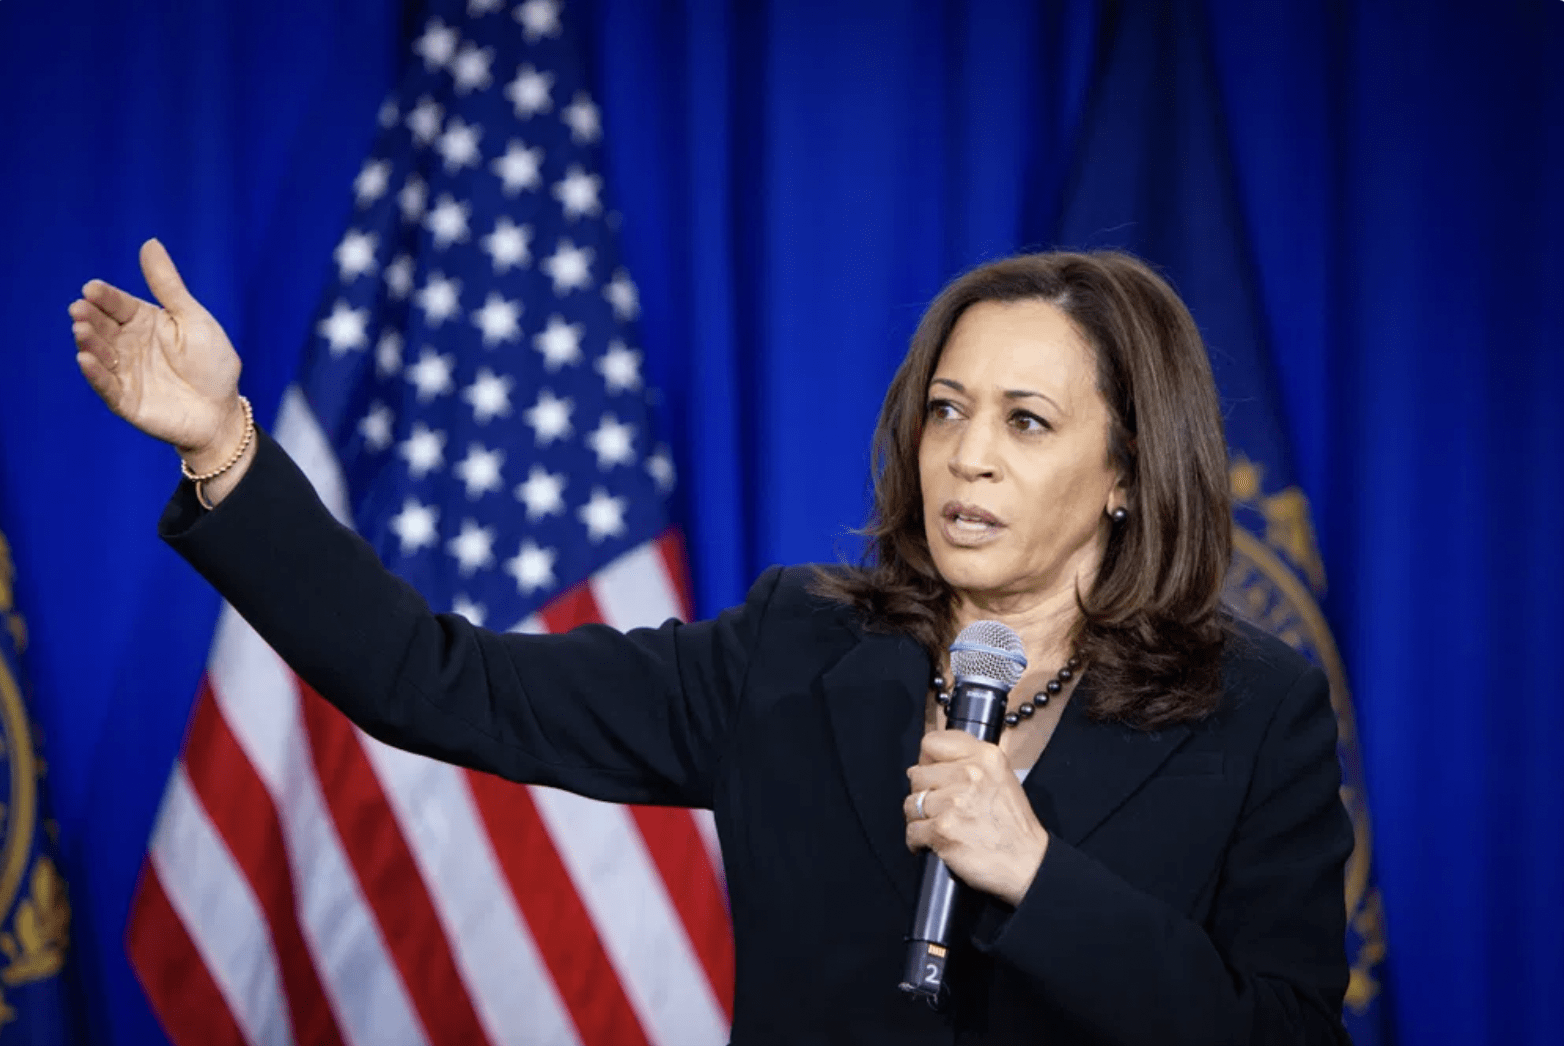 Election 2020 Kamala Harris Is Breaking Barriers And Paving A Path Towards Parity In Leadership